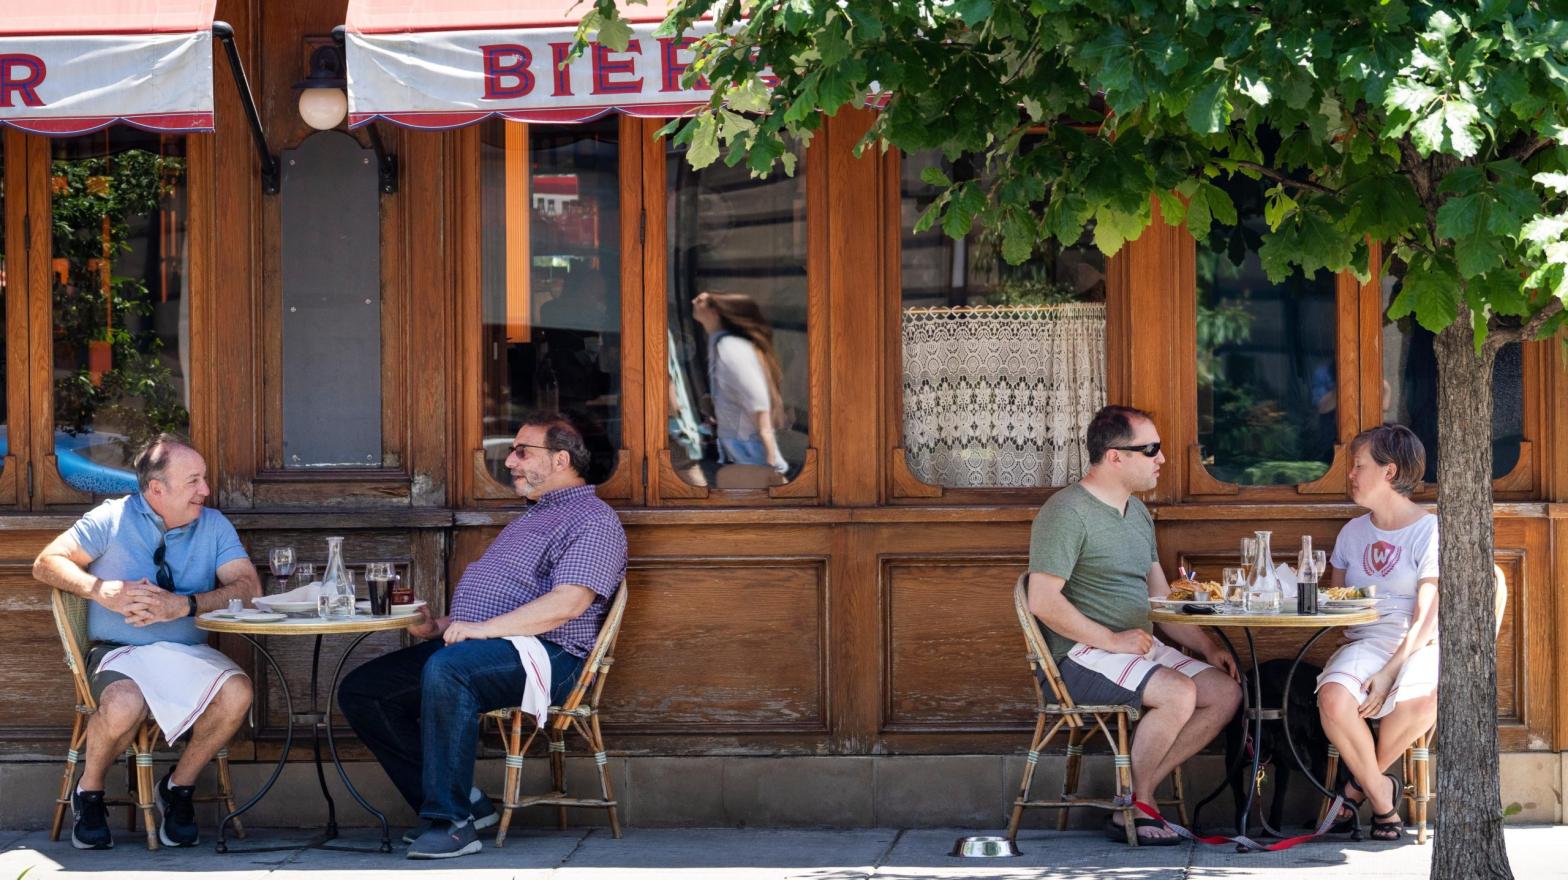 People eat outside during the lunch hour at a restaurant on 14th Street NW in Washington, D.C. (Photo: Drew Angere, Getty Images)